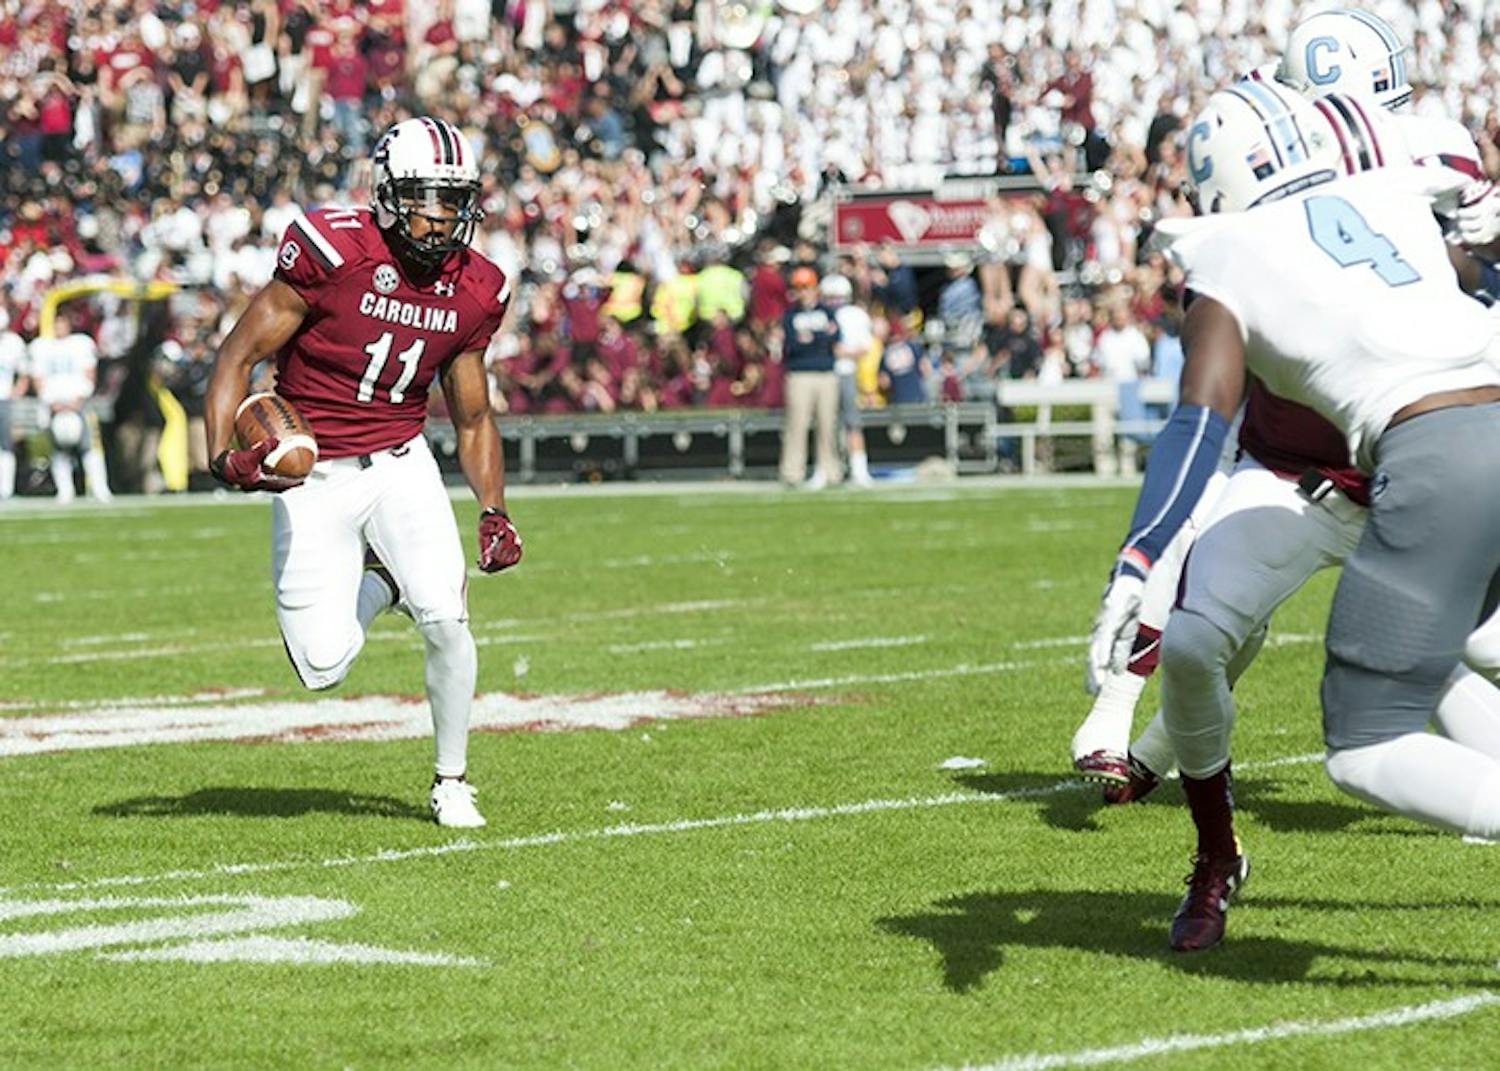 The loss to the Citadel snapped the 22 win streak South Carolina had against non-conference teams.